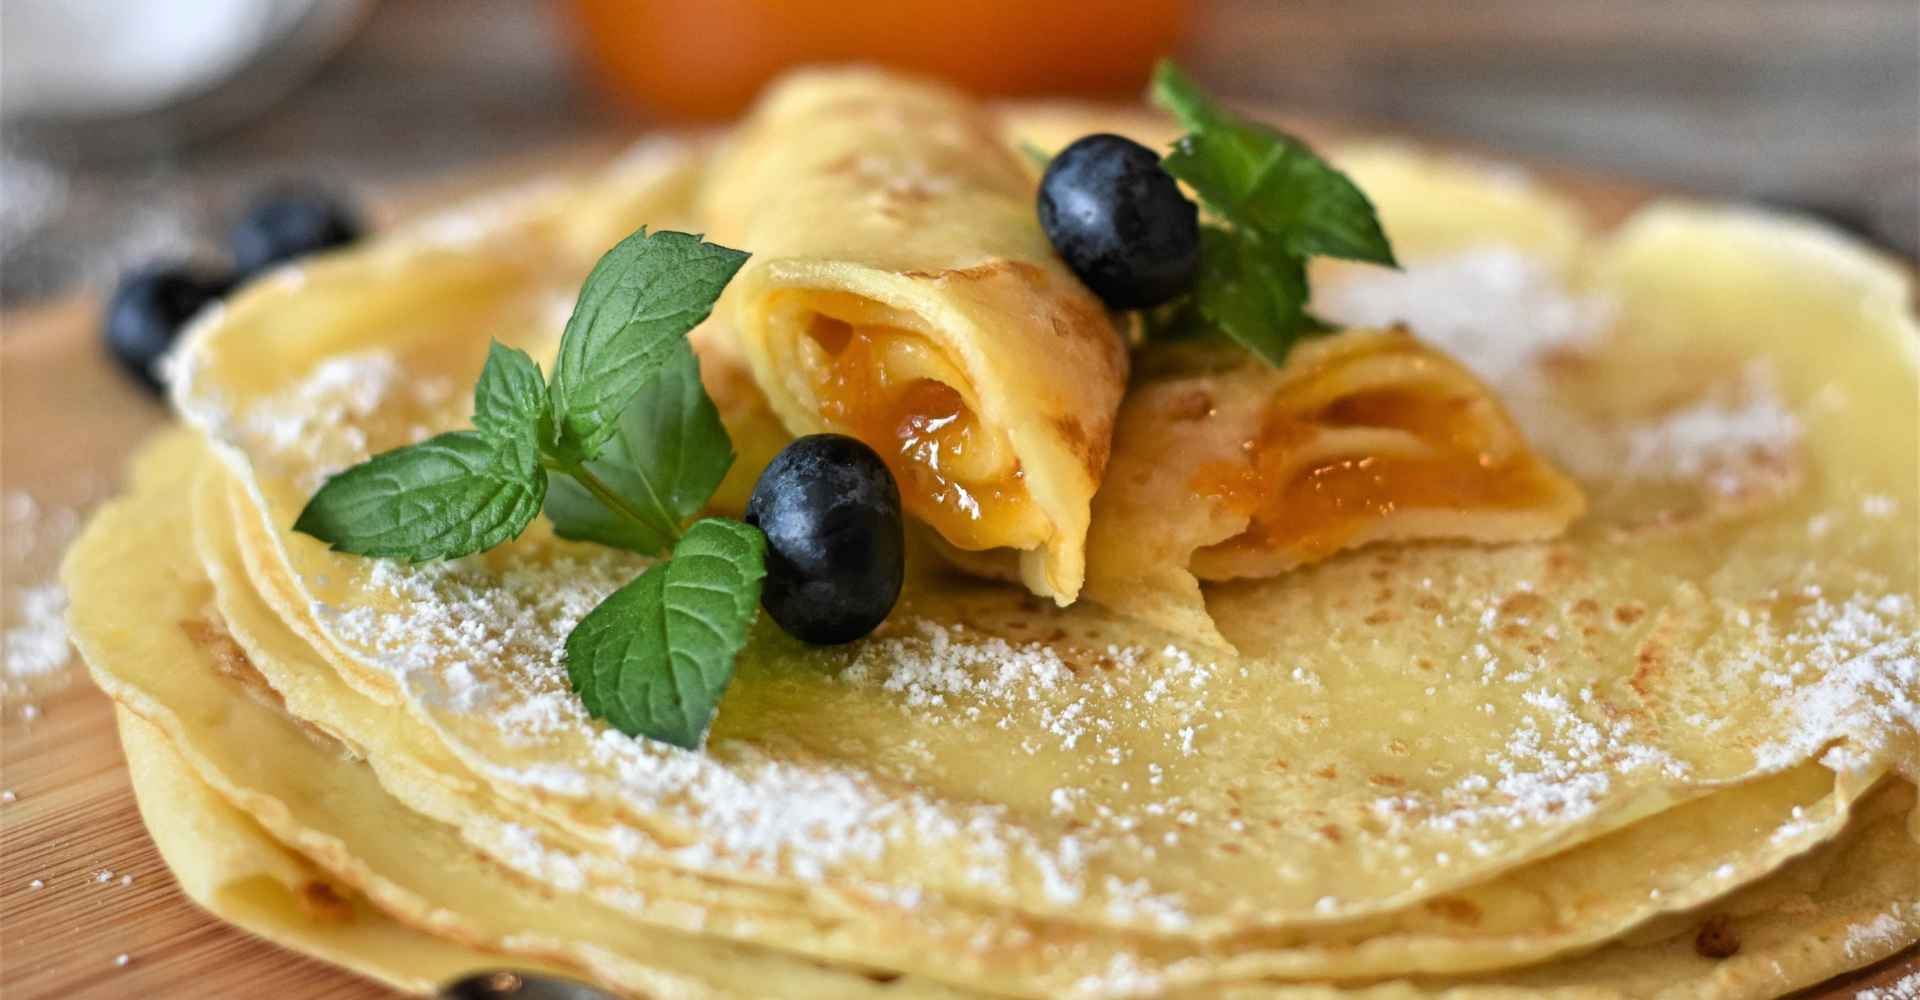 Are You Ready For Shrove Tuesday?